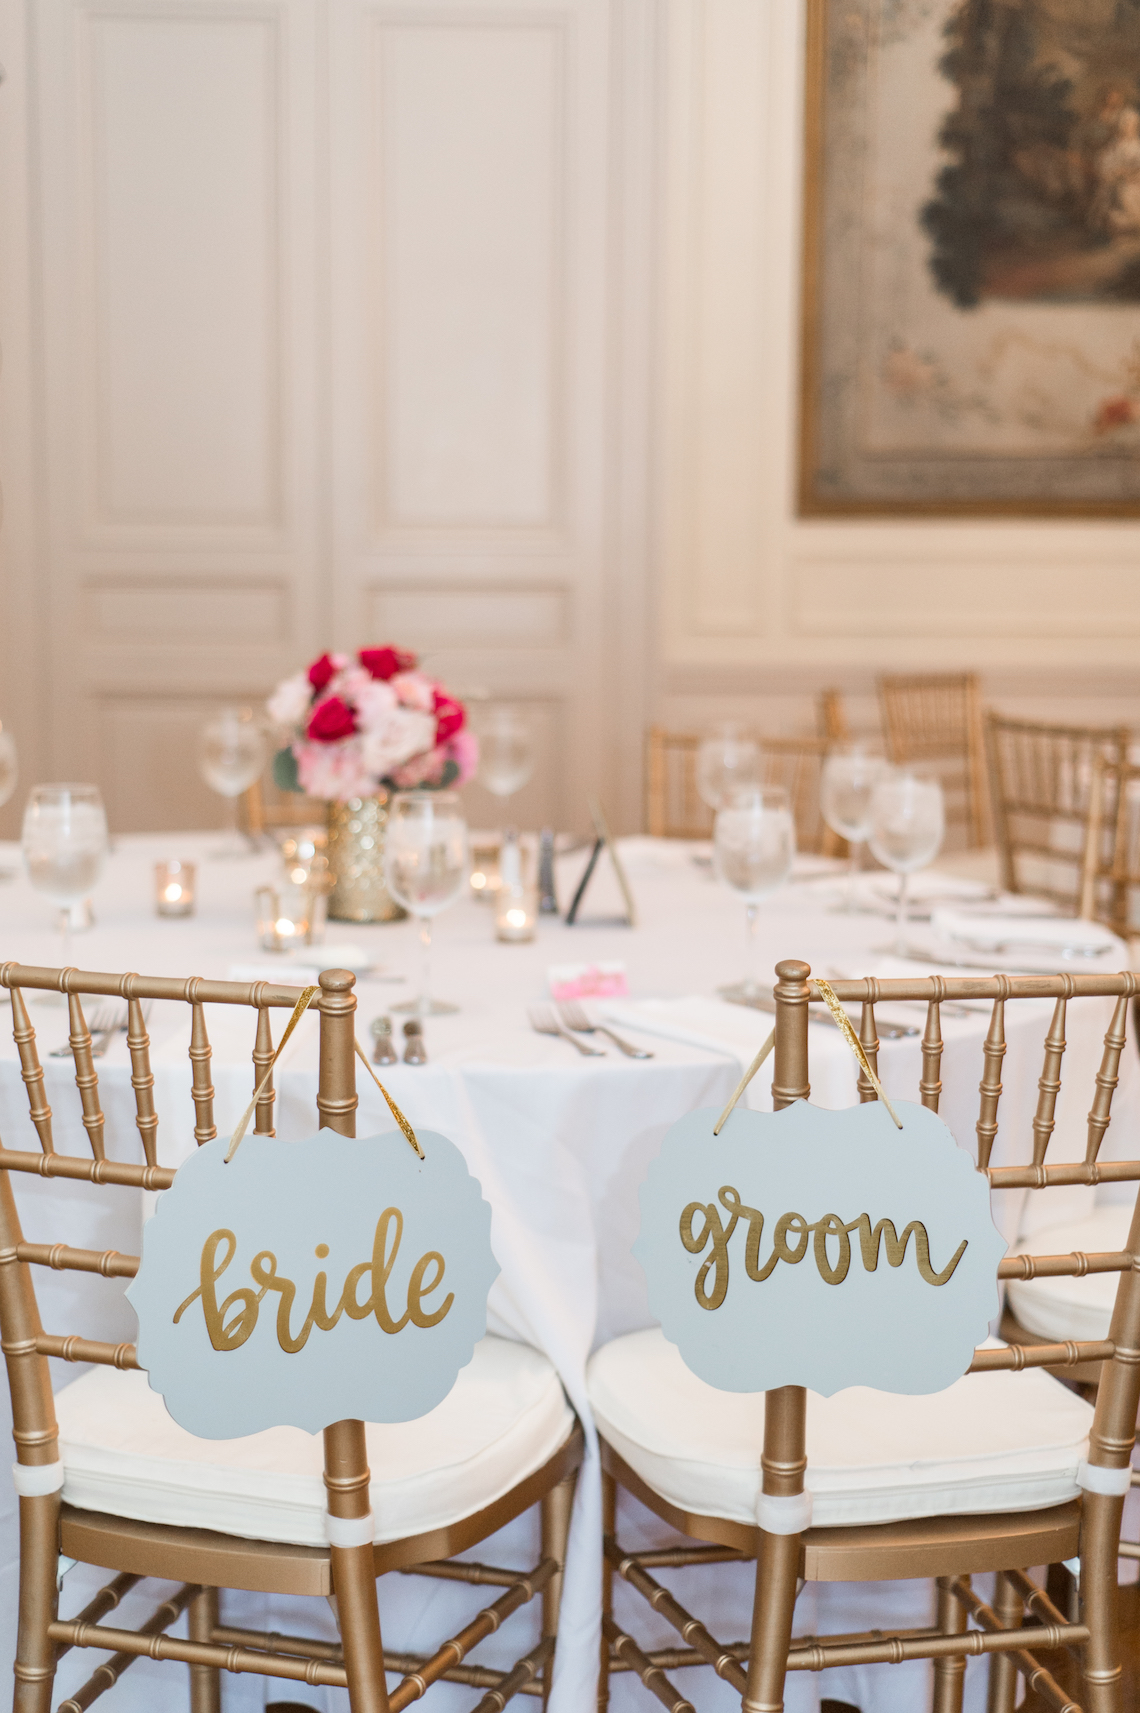 Upscale Art Deco Rhode Island Wedding With A Feathered Dress – Lynne Reznick Photography 54